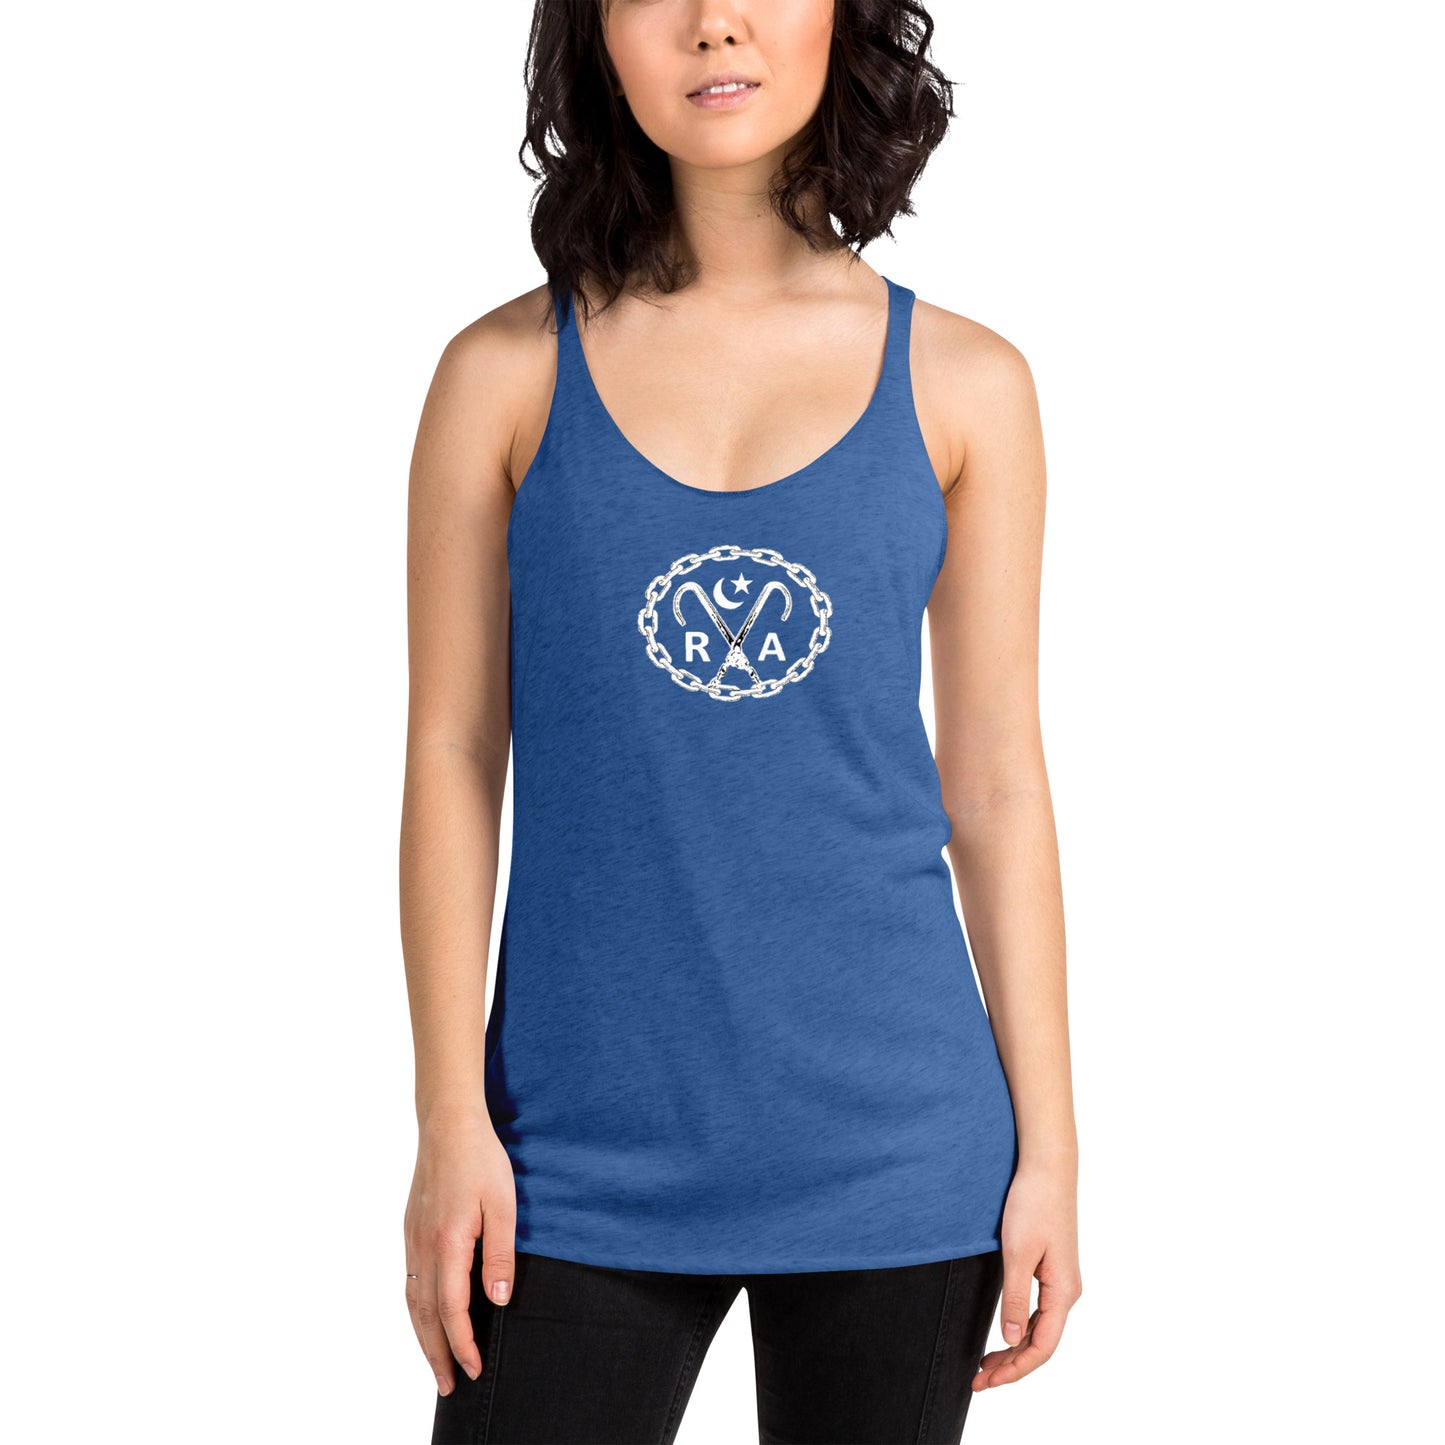 Hook and Chain - White Ink Women's Racerback Tank